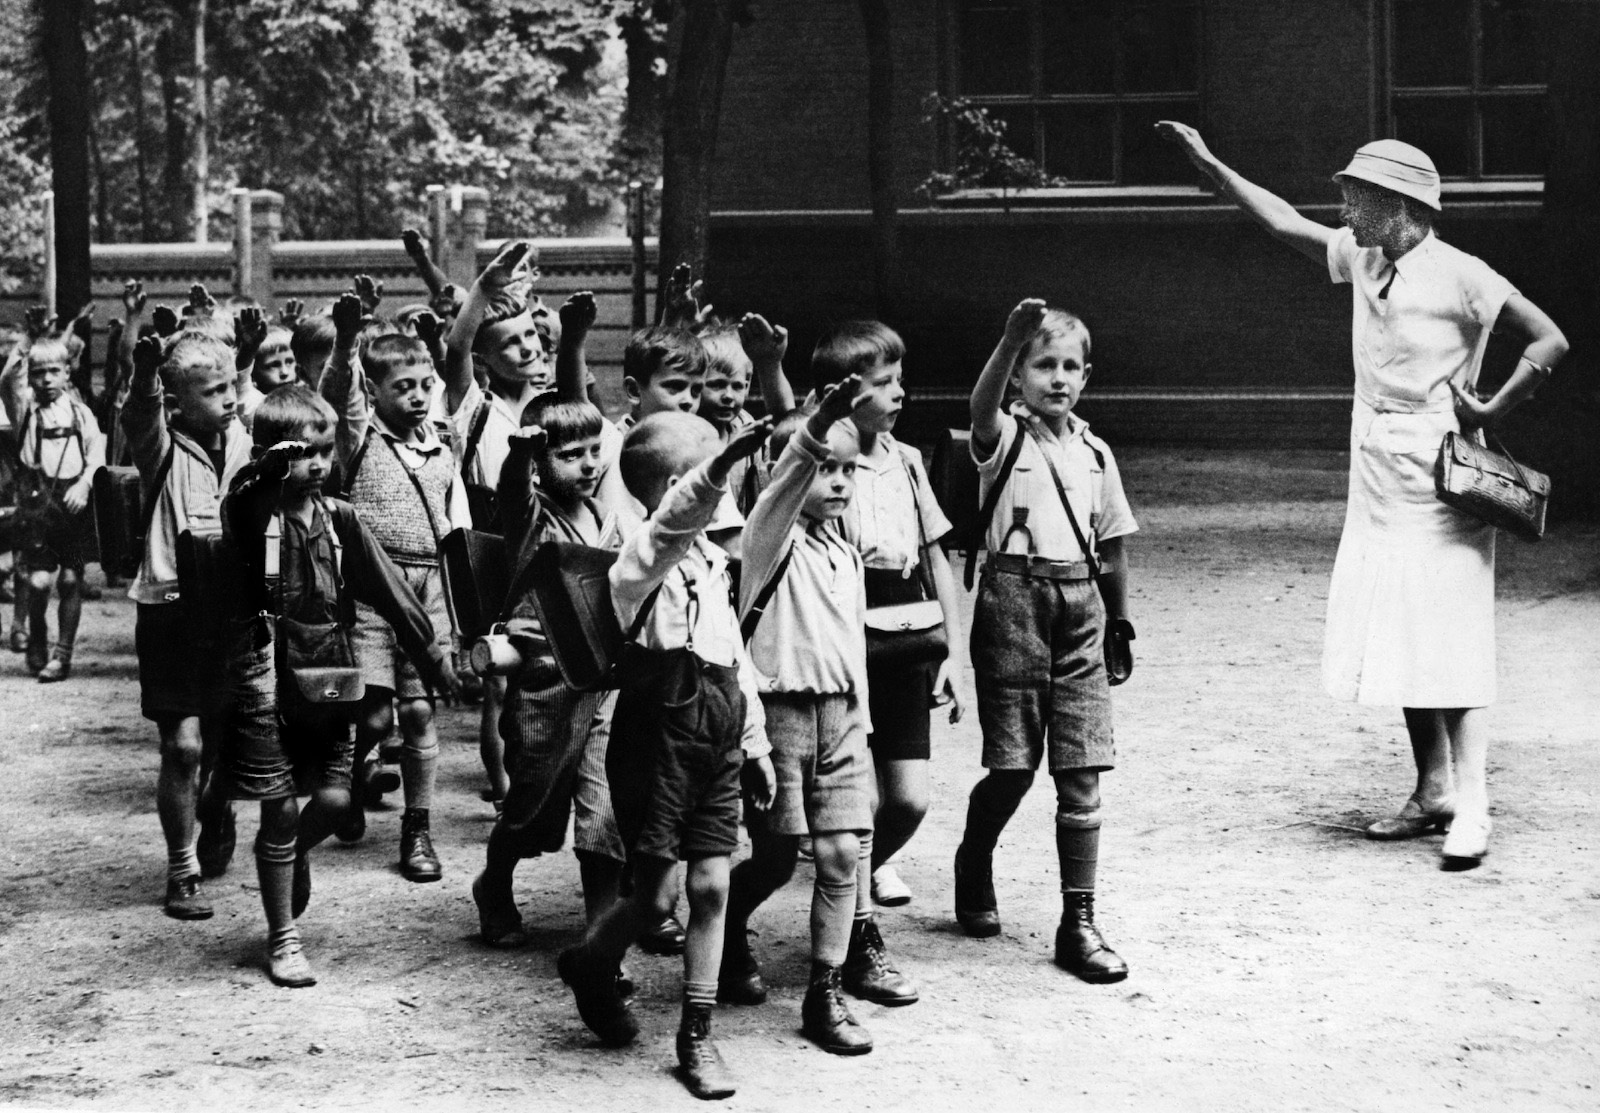 A group of boys, believed to be products of the Lebensborn program, give the Nazi salute while on an outing. Richard Hildebrandt, head of the prgram was executed in 1952.